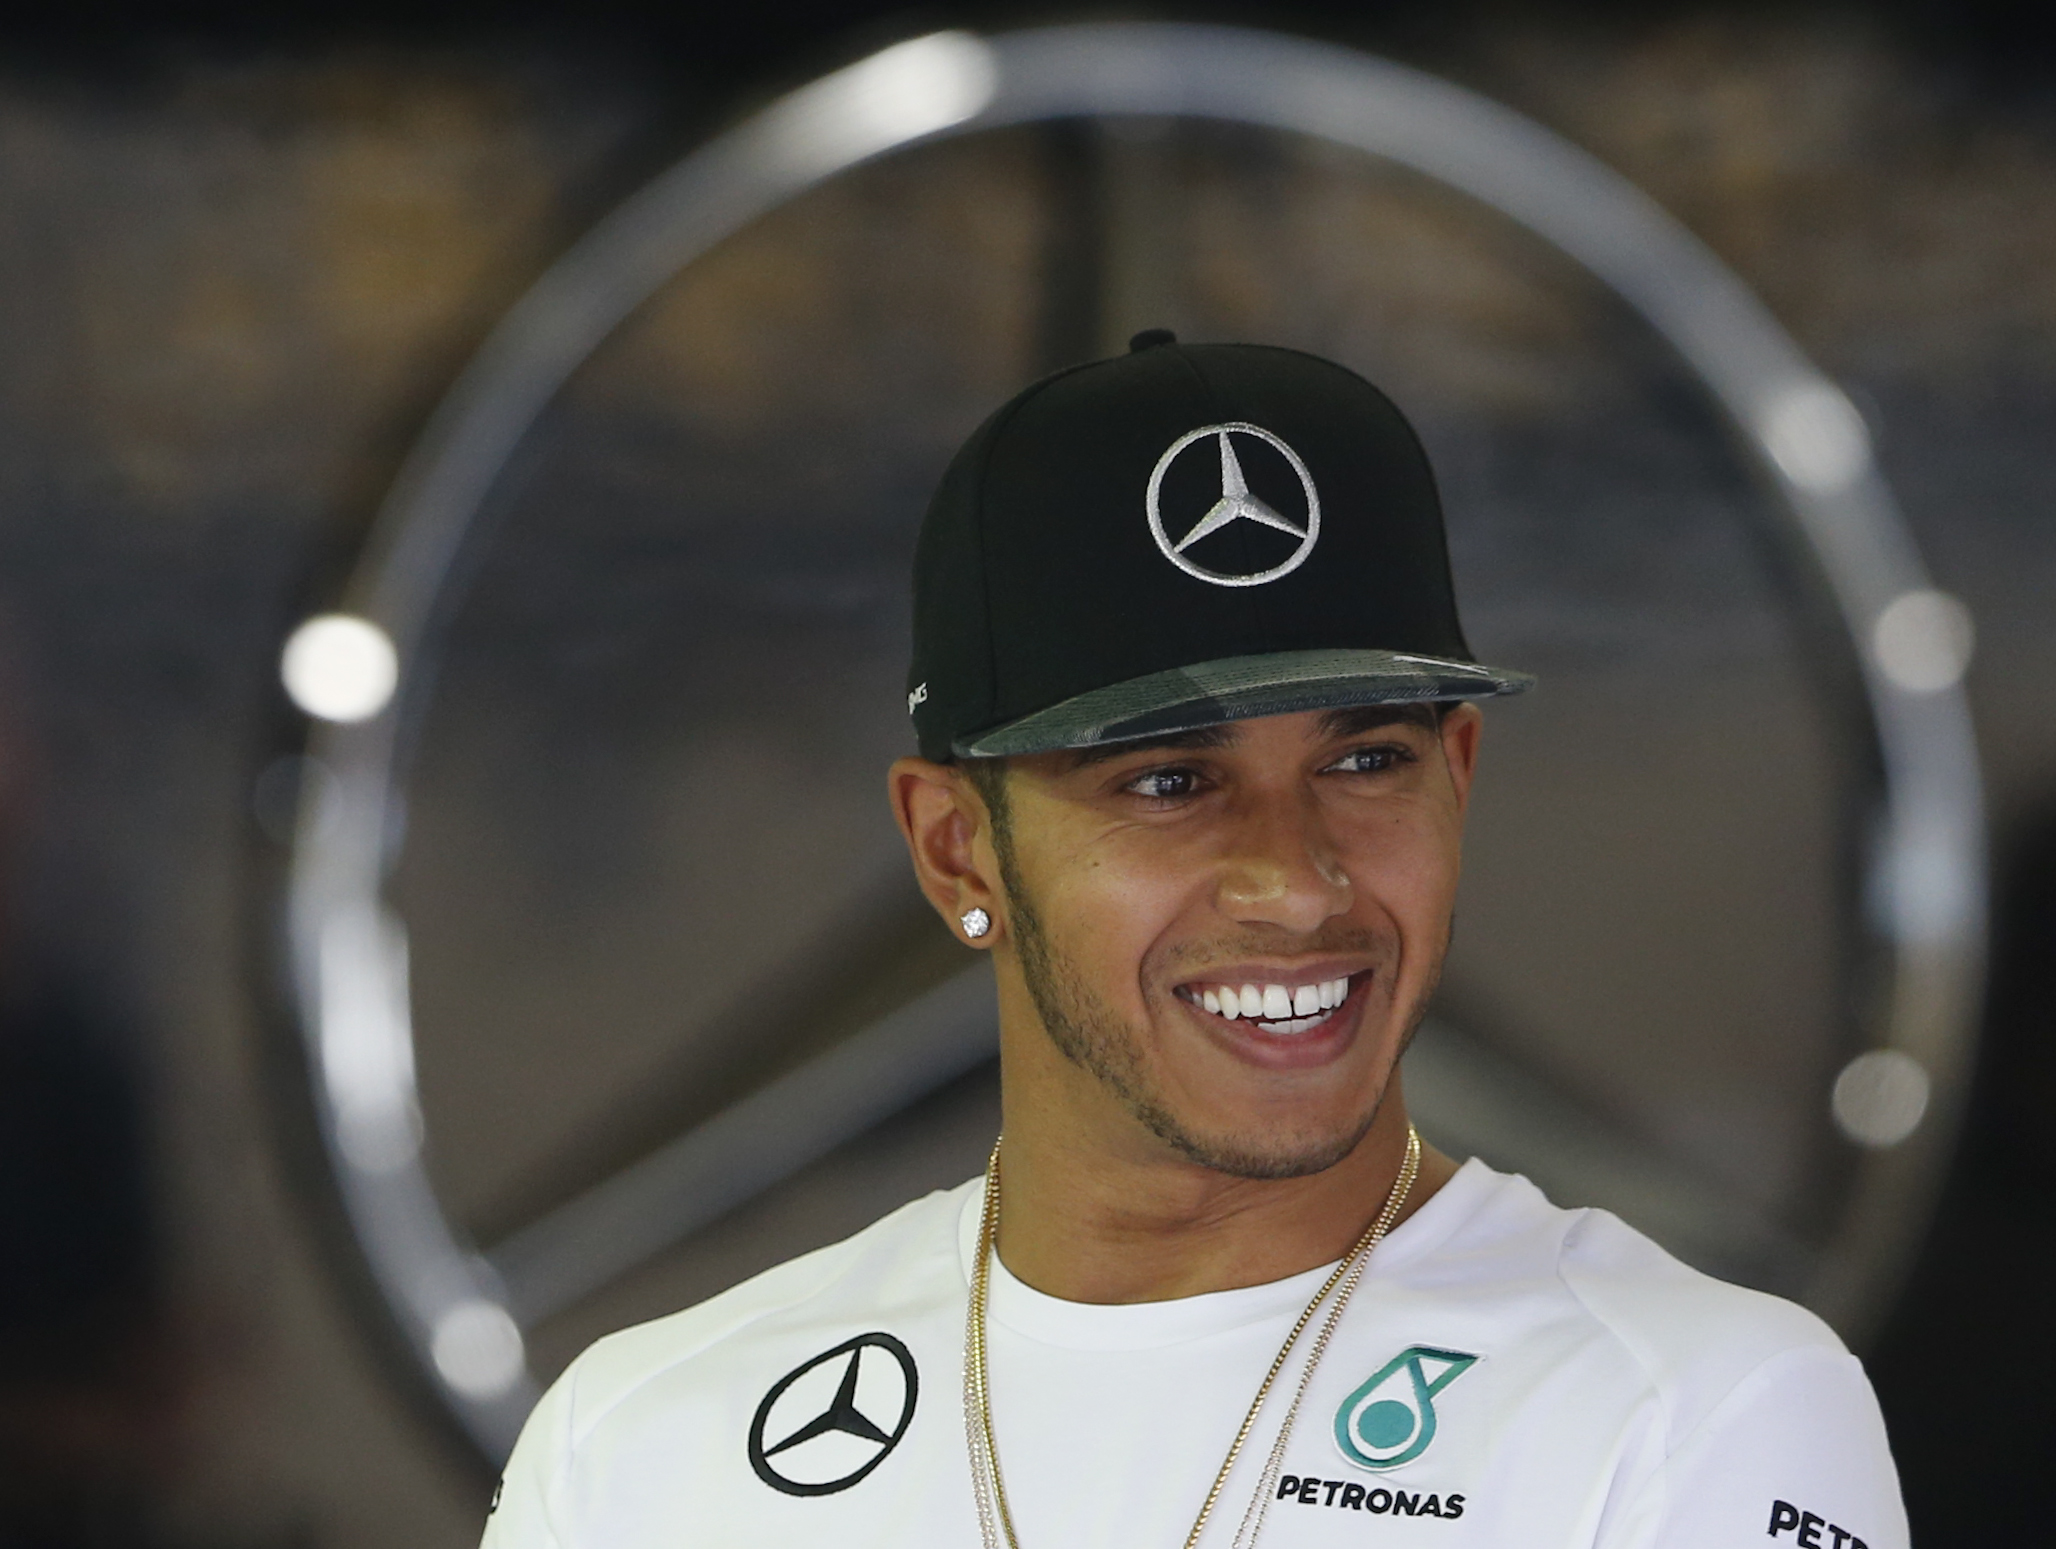 Britain's Lewis Hamilton of Mercedes is looking for his sixth win in a row at the Brazilian Grand Prix. Photo: AP